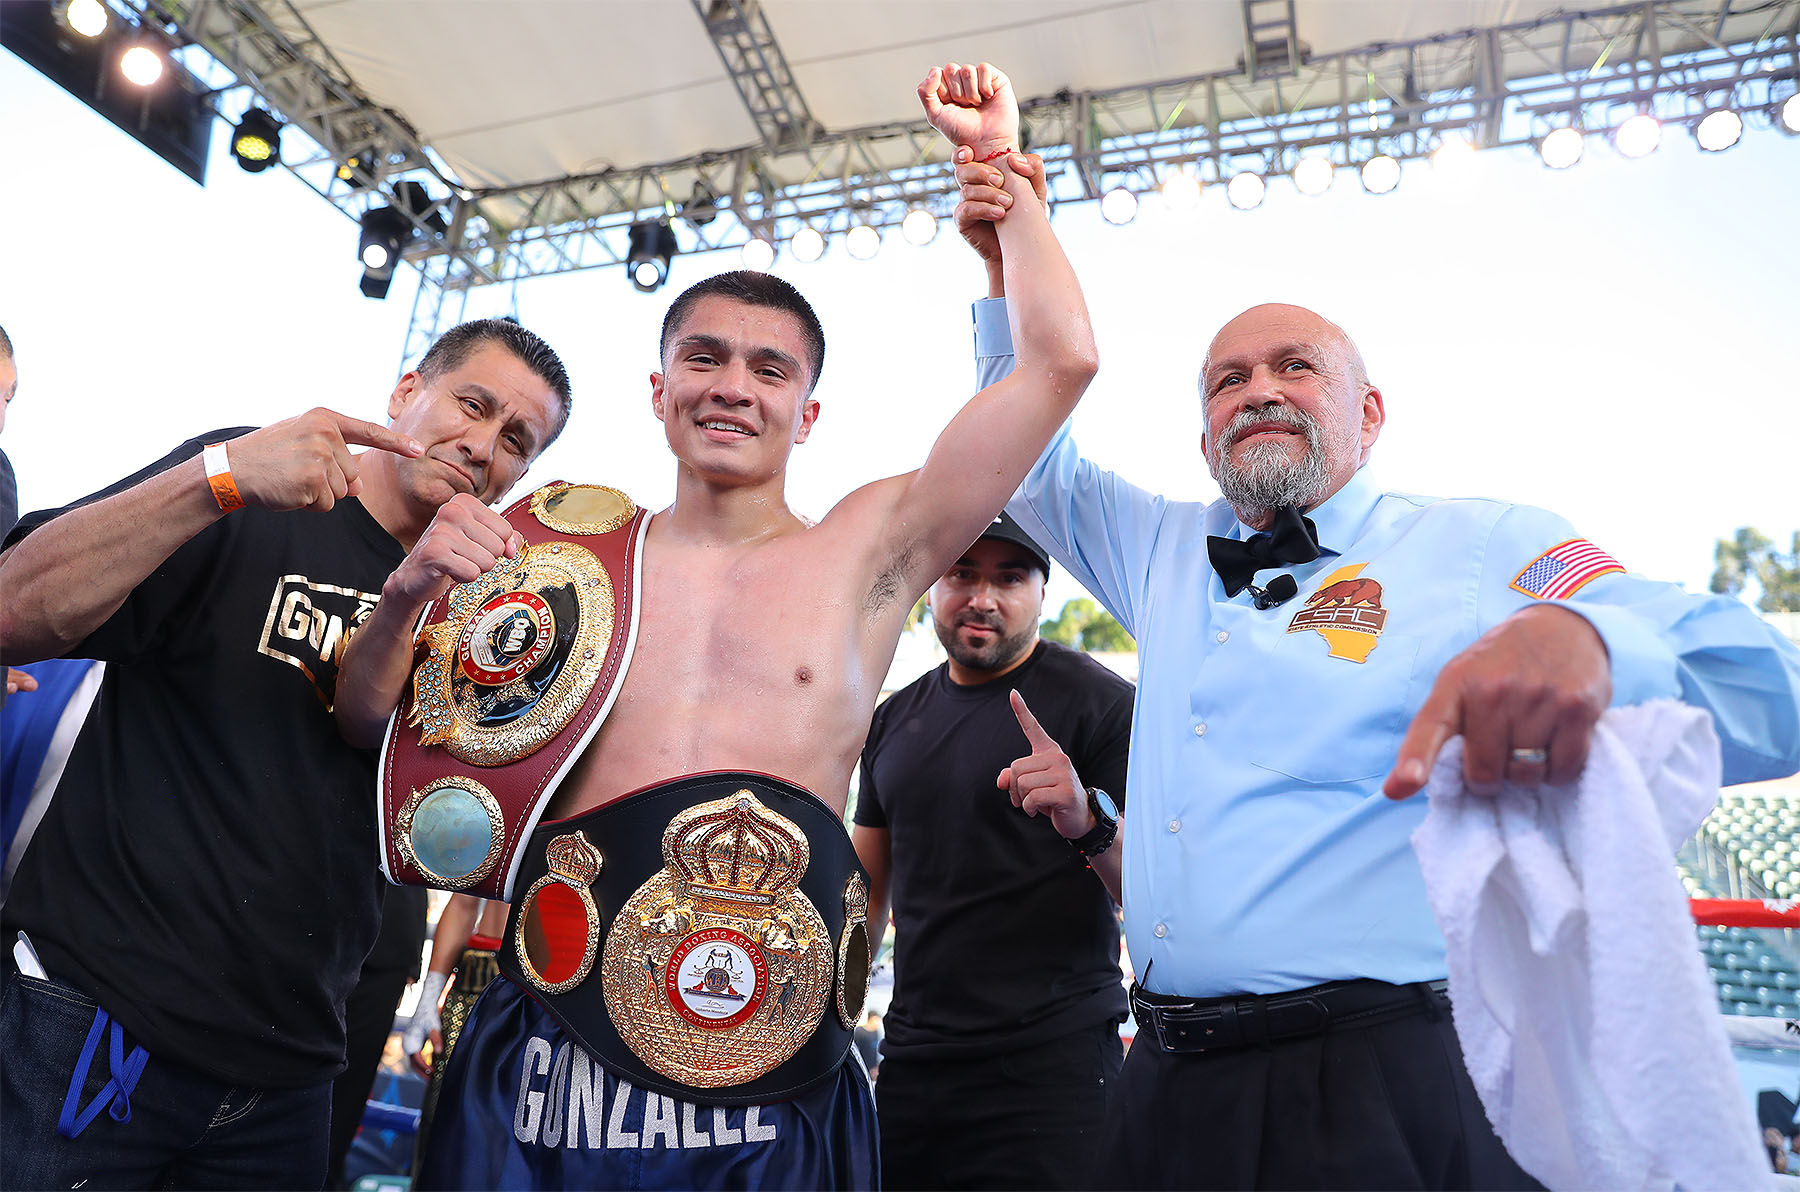 Joet Gonzalez has developed into a formidable featherweight. Photo by Tom Hogan / Golden Boy Promotions